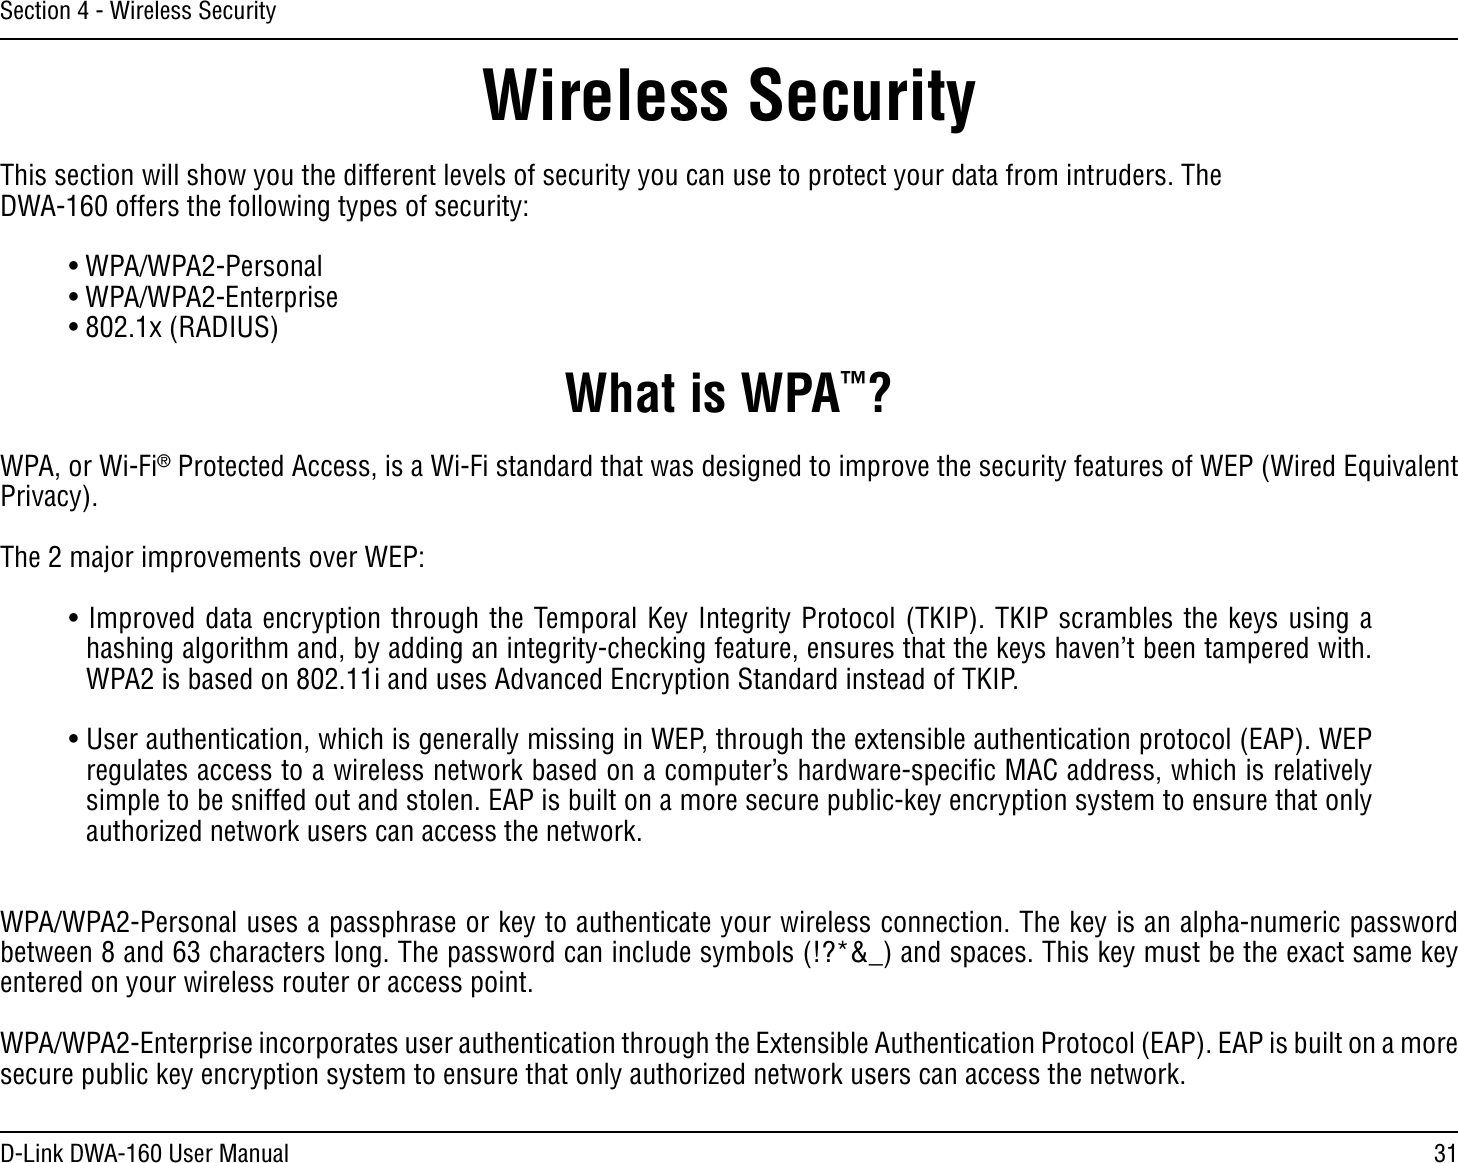 31D-Link DWA-160 User ManualSection 4 - Wireless SecurityWireless SecurityThis section will show you the different levels of security you can use to protect your data from intruders. The DWA-160 offers the following types of security:s70!70!0ERSONAL  s70!70!%NTERPRISEsX2!$)53What is WPA™?WPA, or Wi-Fi® Protected Access, is a Wi-Fi standard that was designed to improve the security features of WEP (Wired Equivalent Privacy).  The 2 major improvements over WEP: s)MPROVEDDATAENCRYPTIONTHROUGHTHE4EMPORAL+EY)NTEGRITY0ROTOCOL4+)04+)0SCRAMBLESTHEKEYSUSINGAHASHINGALGORITHMANDBYADDINGANINTEGRITYCHECKINGFEATUREENSURESTHATTHEKEYSHAVENTBEENTAMPEREDWITHWPA2 is based on 802.11i and uses Advanced Encryption Standard instead of TKIP.s5SERAUTHENTICATIONWHICHISGENERALLYMISSINGIN7%0THROUGHTHEEXTENSIBLEAUTHENTICATIONPROTOCOL%!07%0REGULATESACCESSTOAWIRELESSNETWORKBASEDONACOMPUTERSHARDWARESPECIlC-!#ADDRESSWHICHISRELATIVELYsimple to be sniffed out and stolen. EAP is built on a more secure public-key encryption system to ensure that only AUTHORIZEDNETWORKUSERSCANACCESSTHENETWORKWPA/WPA2-Personal uses a passphrase or key to authenticate your wireless connection. The key is an alpha-numeric password BETWEENANDCHARACTERSLONG4HEPASSWORDCANINCLUDESYMBOLS?ANDSPACES4HISKEYMUSTBETHEEXACTSAMEKEYentered on your wireless router or access point.WPA/WPA2-Enterprise incorporates user authentication through the Extensible Authentication Protocol (EAP). EAP is built on a more SECUREPUBLICKEYENCRYPTIONSYSTEMTOENSURETHATONLYAUTHORIZEDNETWORKUSERSCANACCESSTHENETWORK